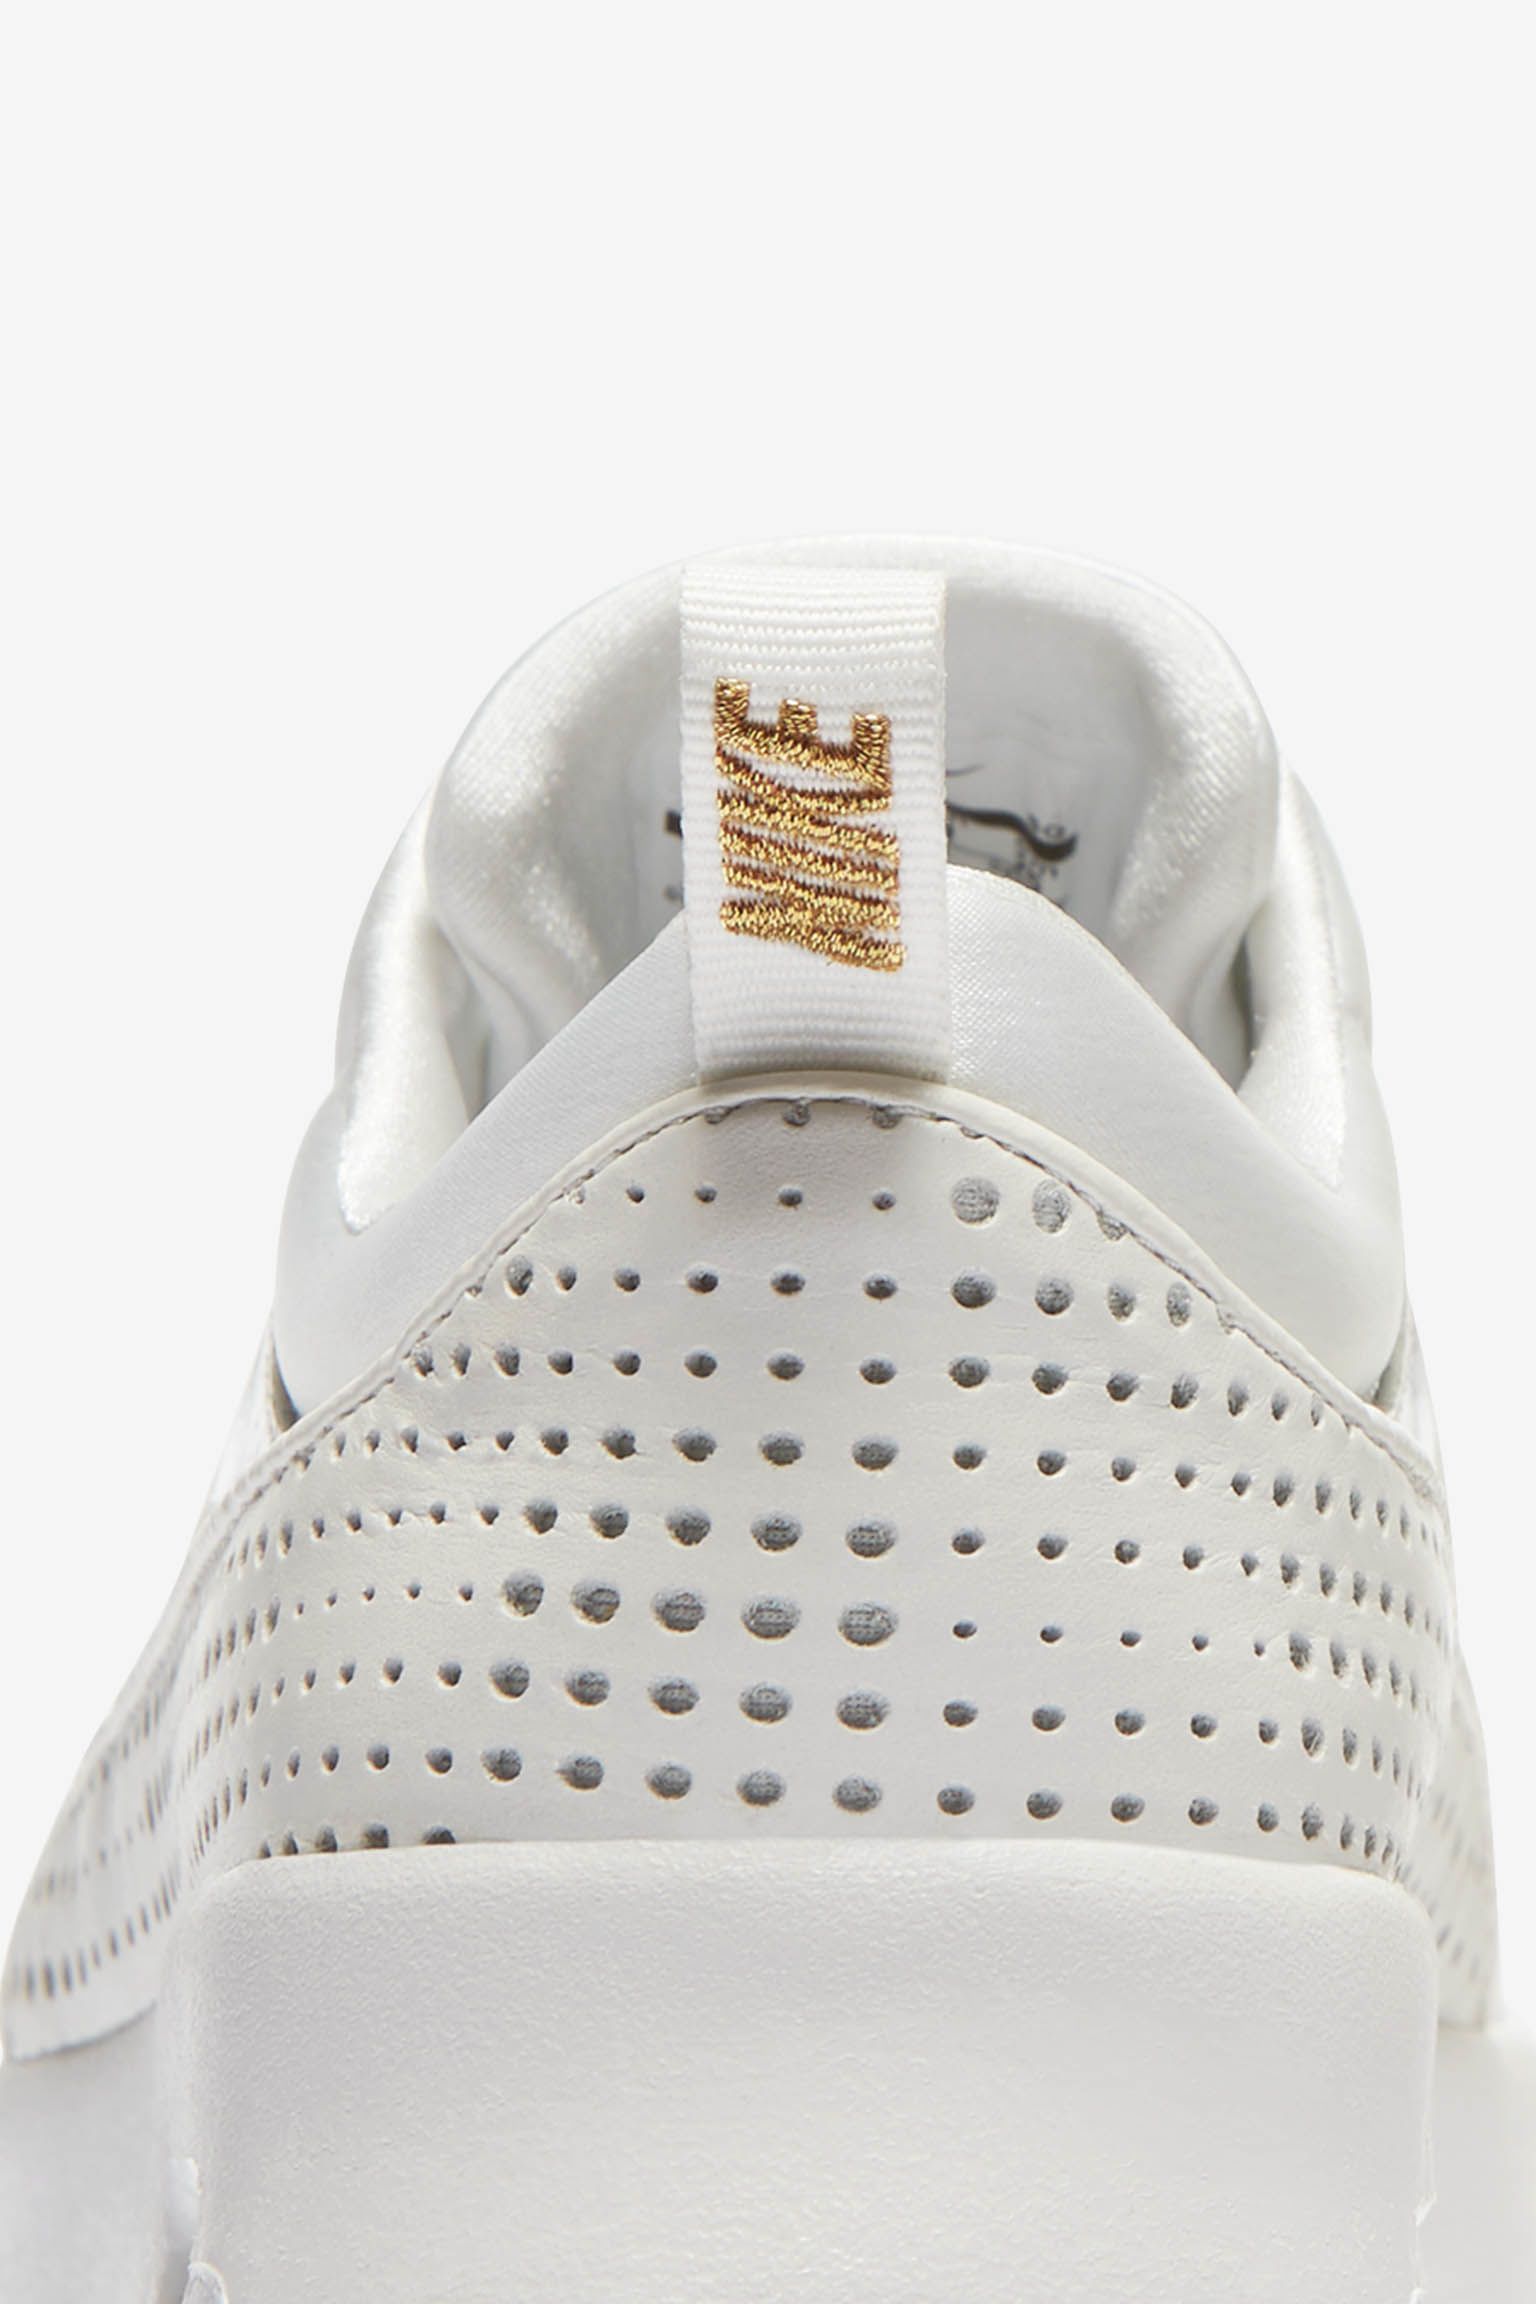 nike air max thea womens white and gold